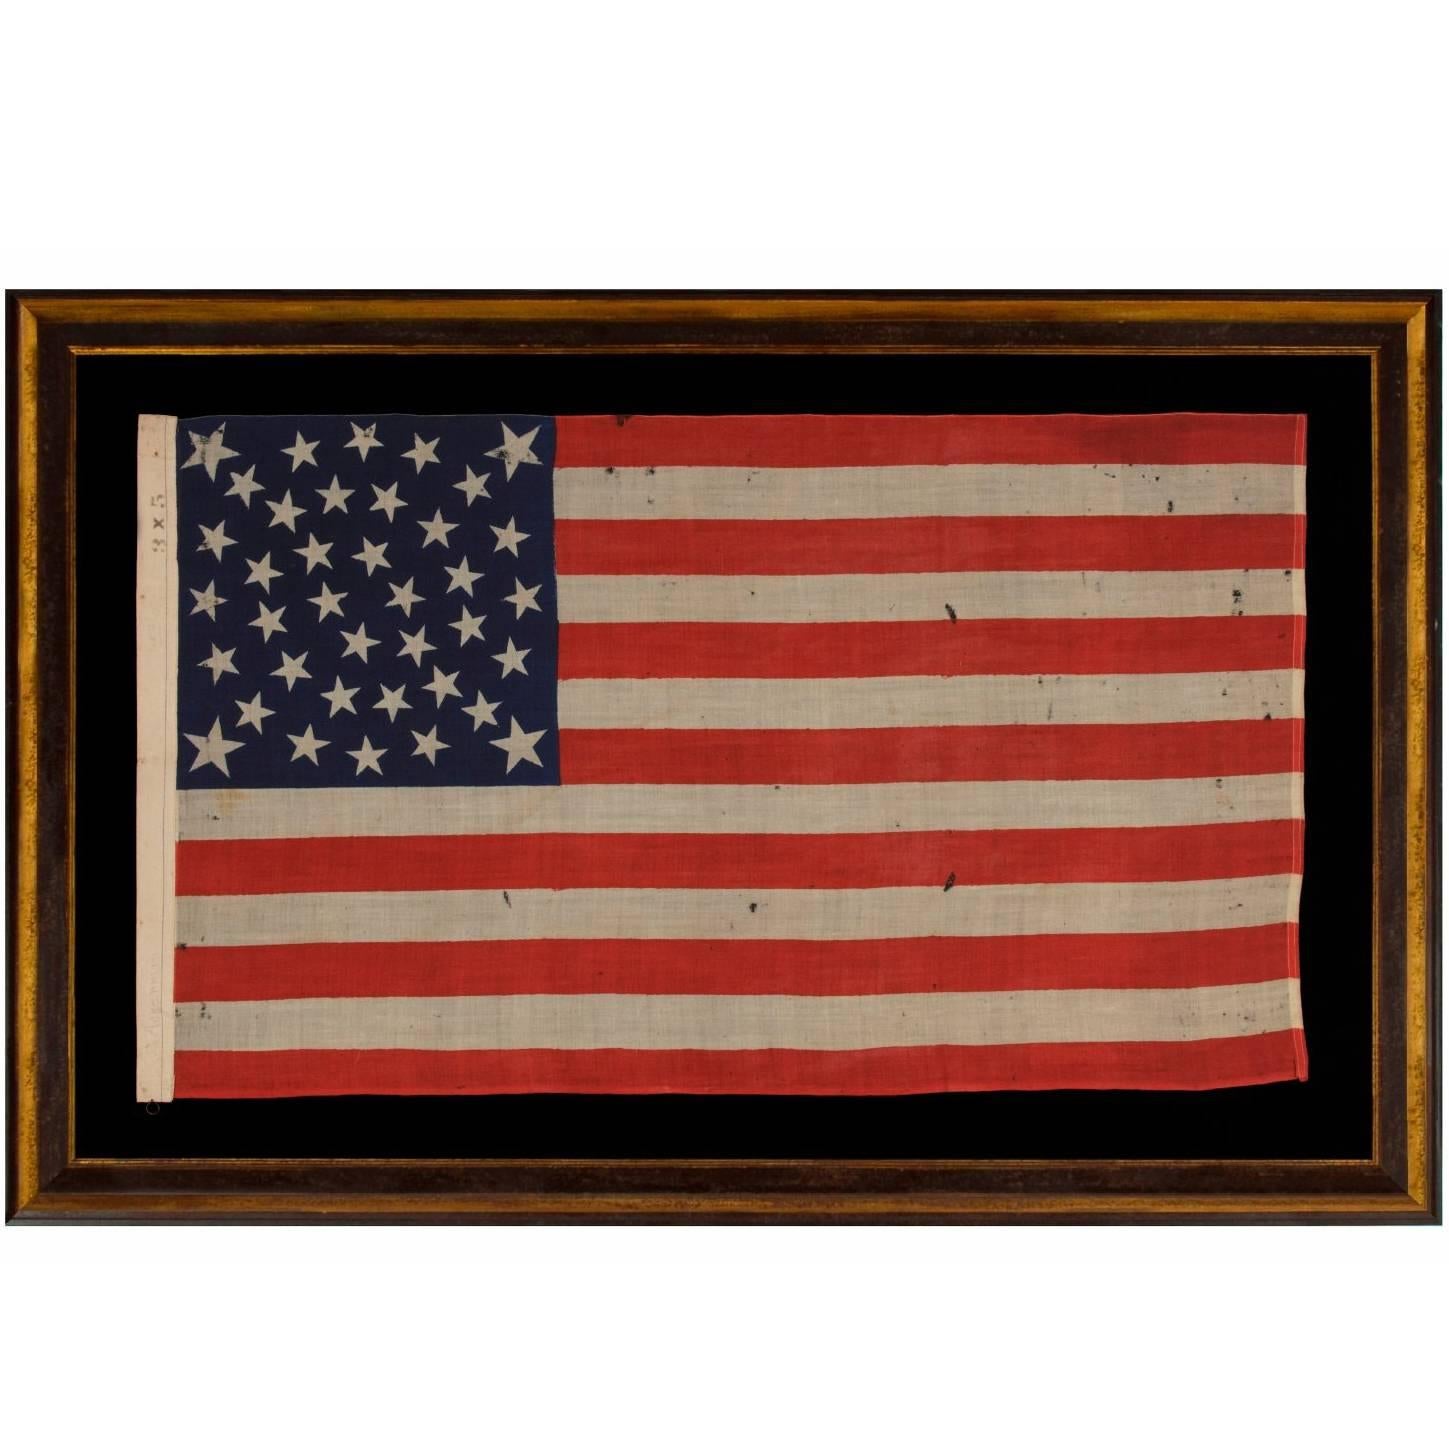 38 Stars on an Extraordinary Antique Flag Made for the 1876 Centennial Expo